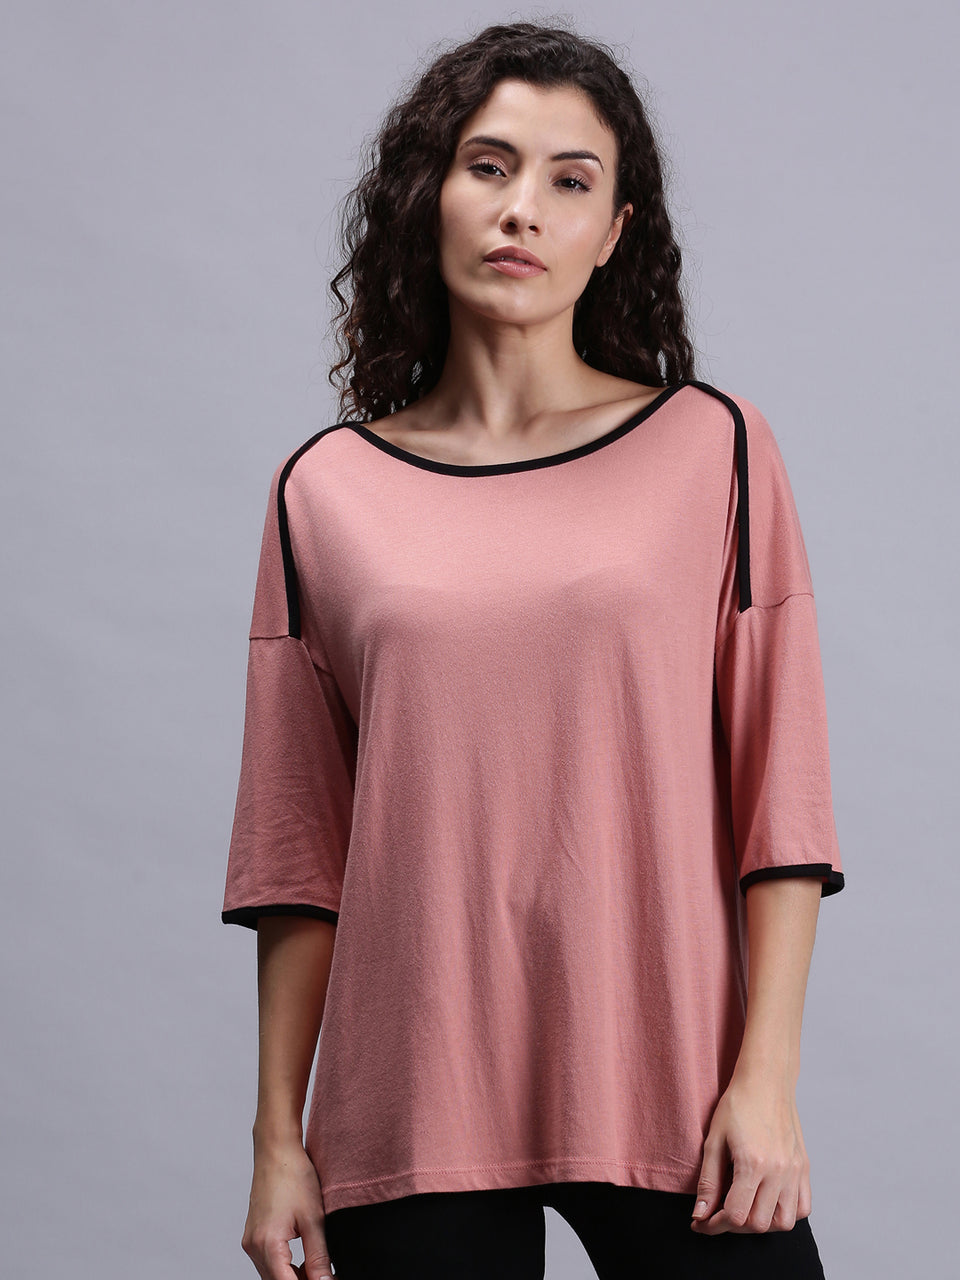 women solid pink casual tops